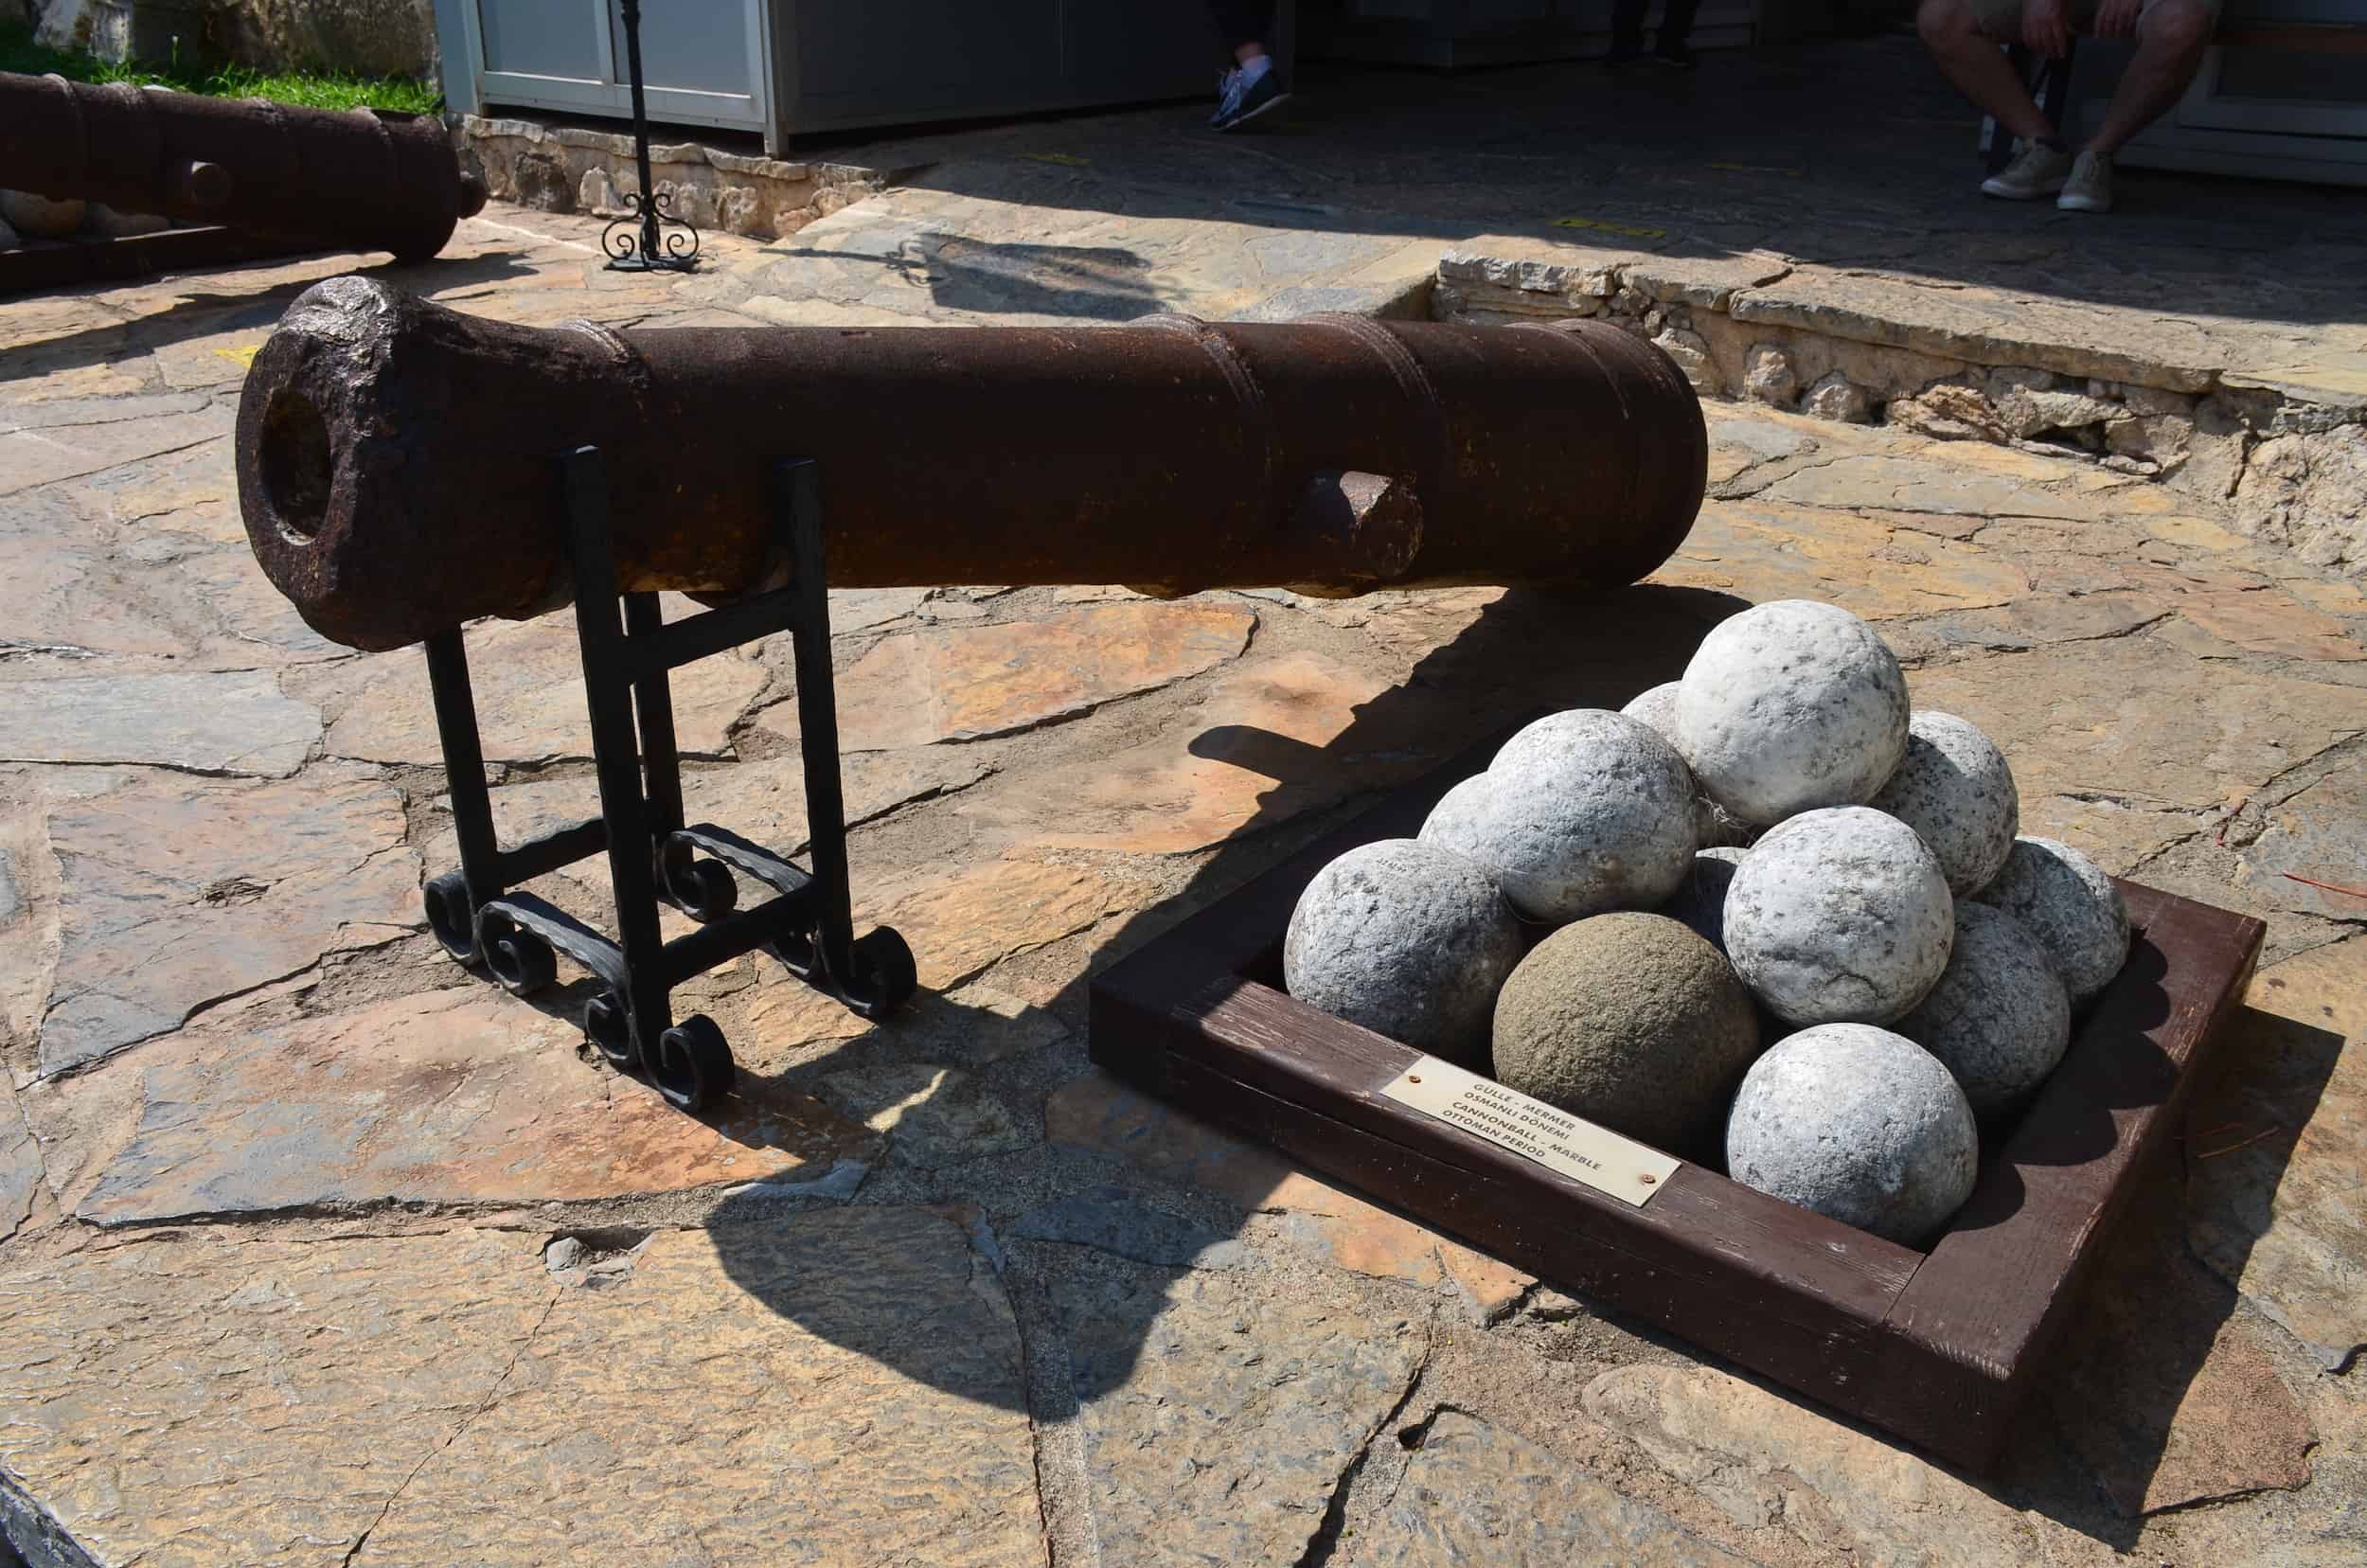 Ottoman cannon with marble cannonballs at the Marmaris Museum